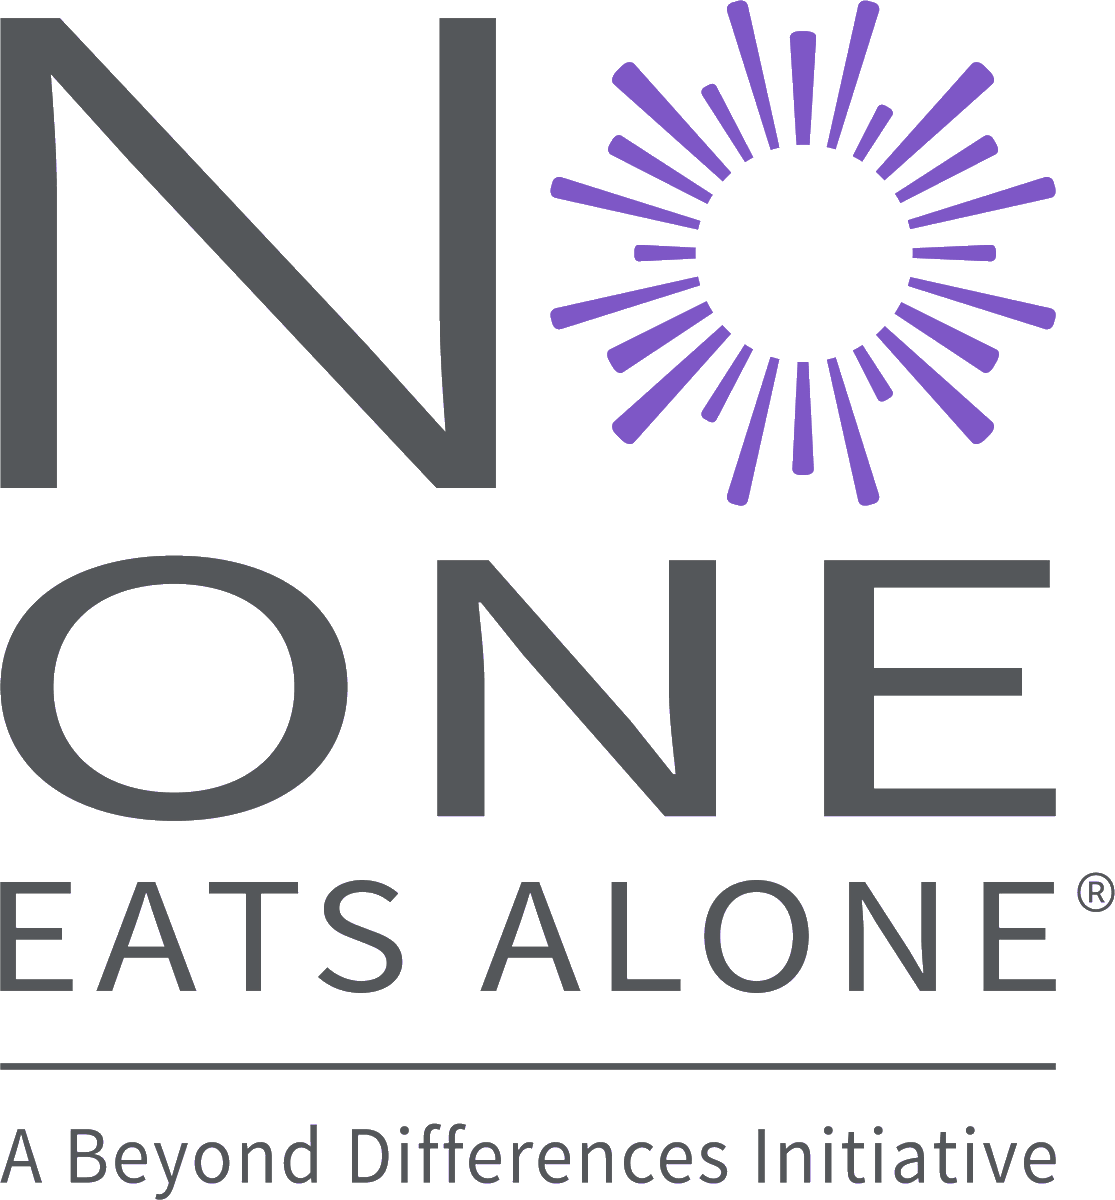 Fun fact Friday😃

Today is National No-one eats alone day! Although mainly promoted in schools- this day can also be celebrated in our work sites. If you see someone alone on their break- why not go over and sit with them? 
#thrive #cntw #nooneeatsalone
beyonddifferences.org/no-one-eats-al…